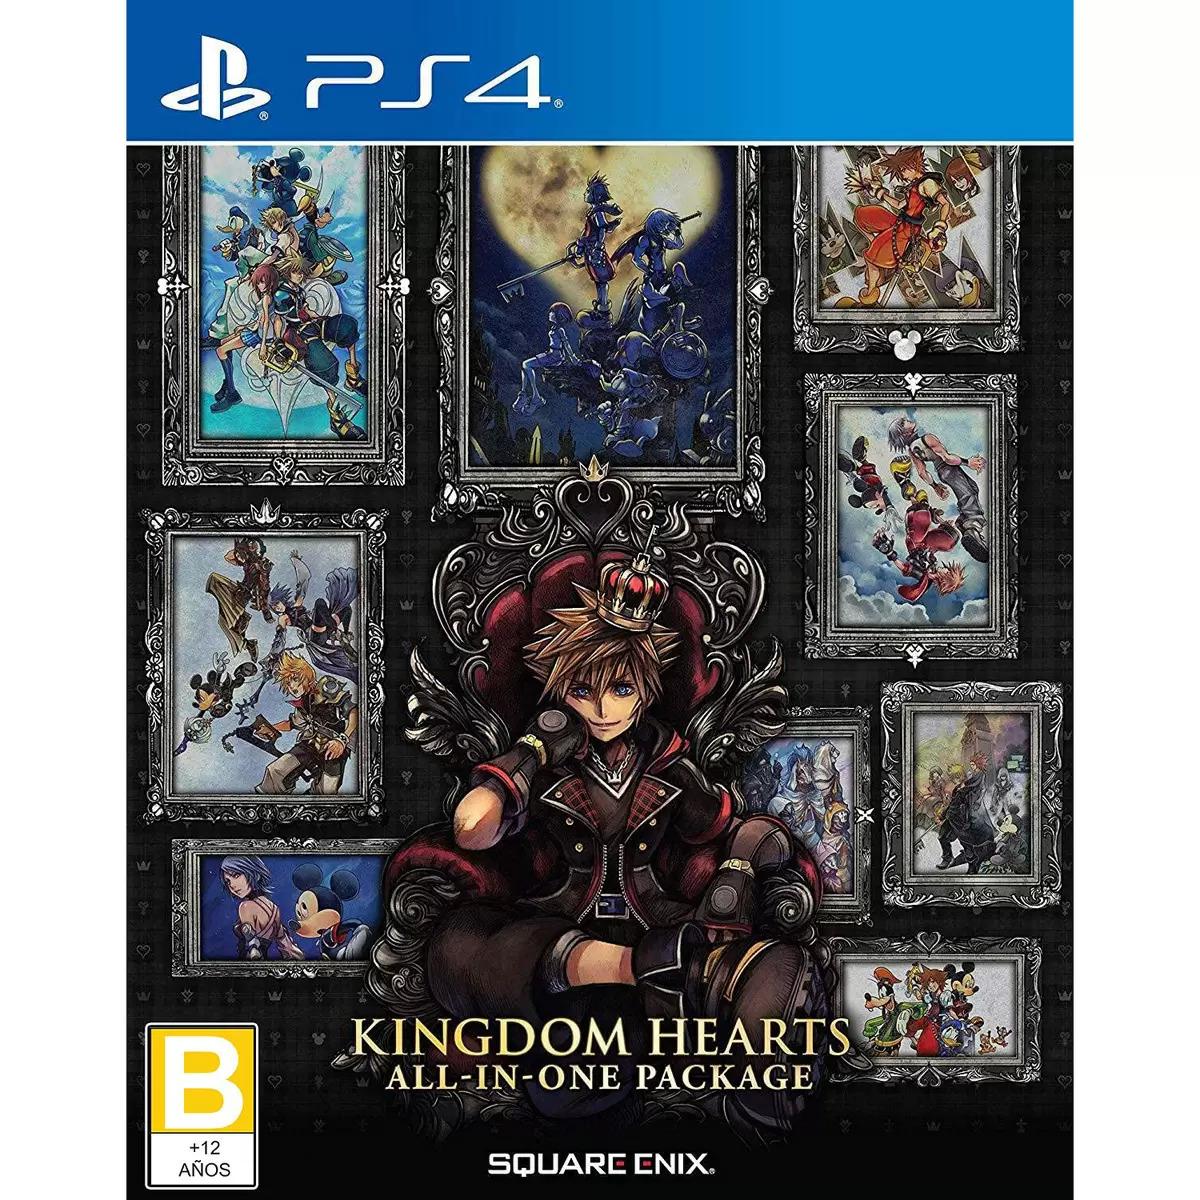 Kingdom Hearts All-In-One Package PS4 for $19.99